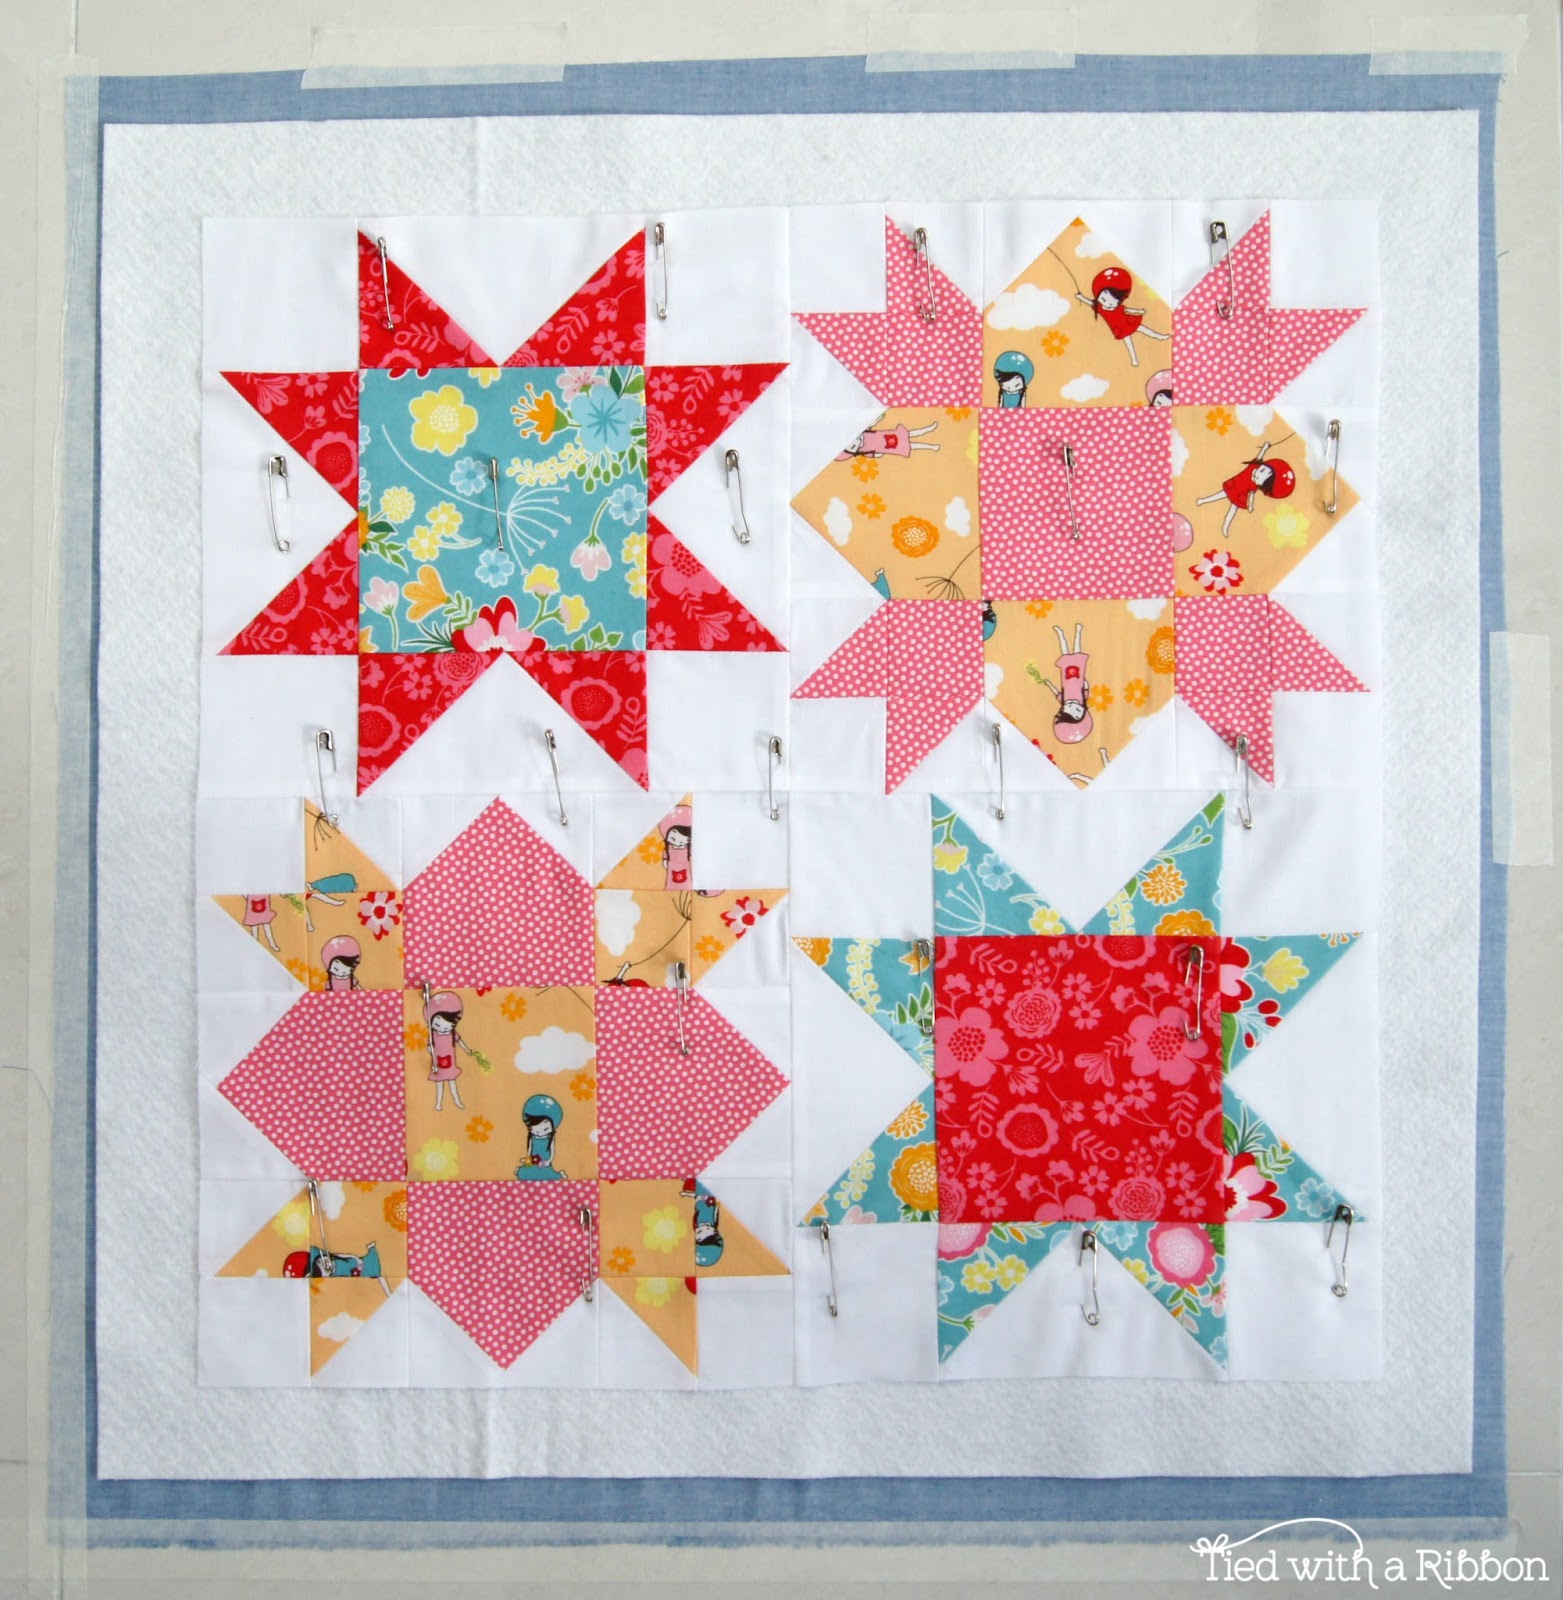 SANDWICHING YOUR QUILT